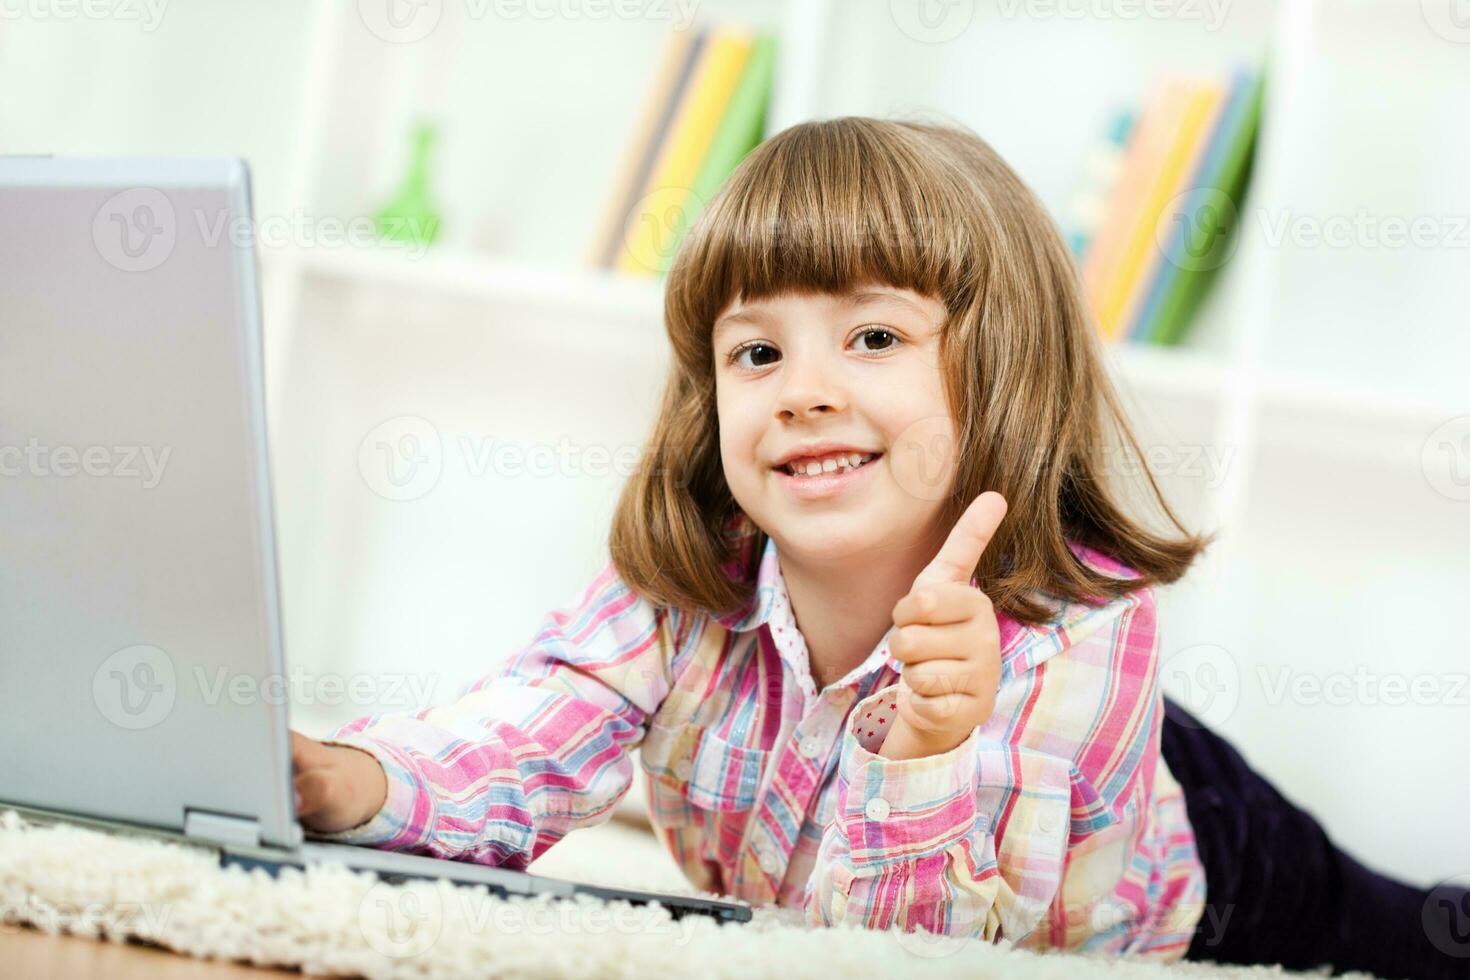 A girl using a laptop photo